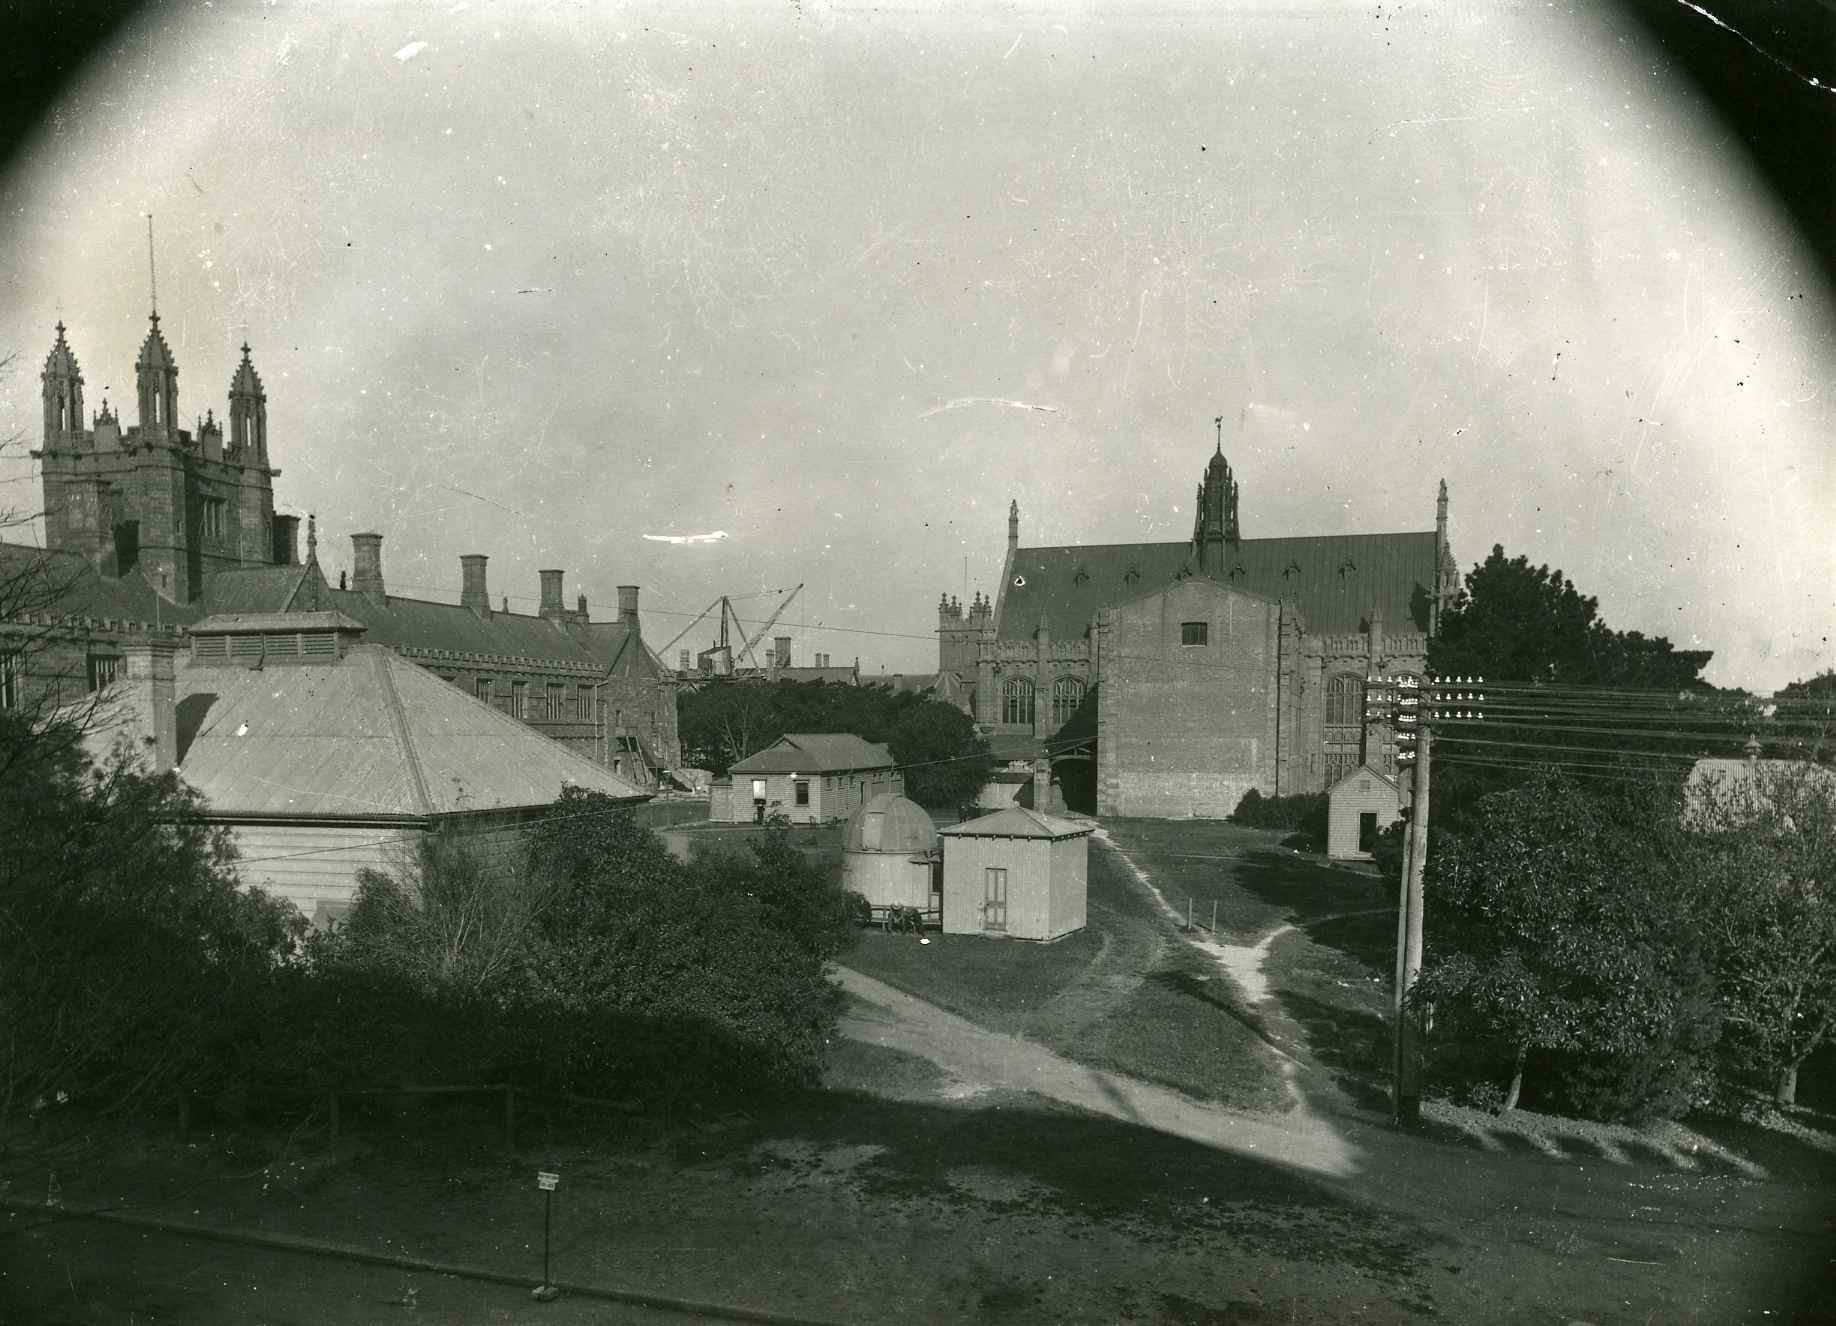 VIEW SHOWING MAIN BUILDINGS BEING BUILT AND AREA NOW THE QUADRANGLE